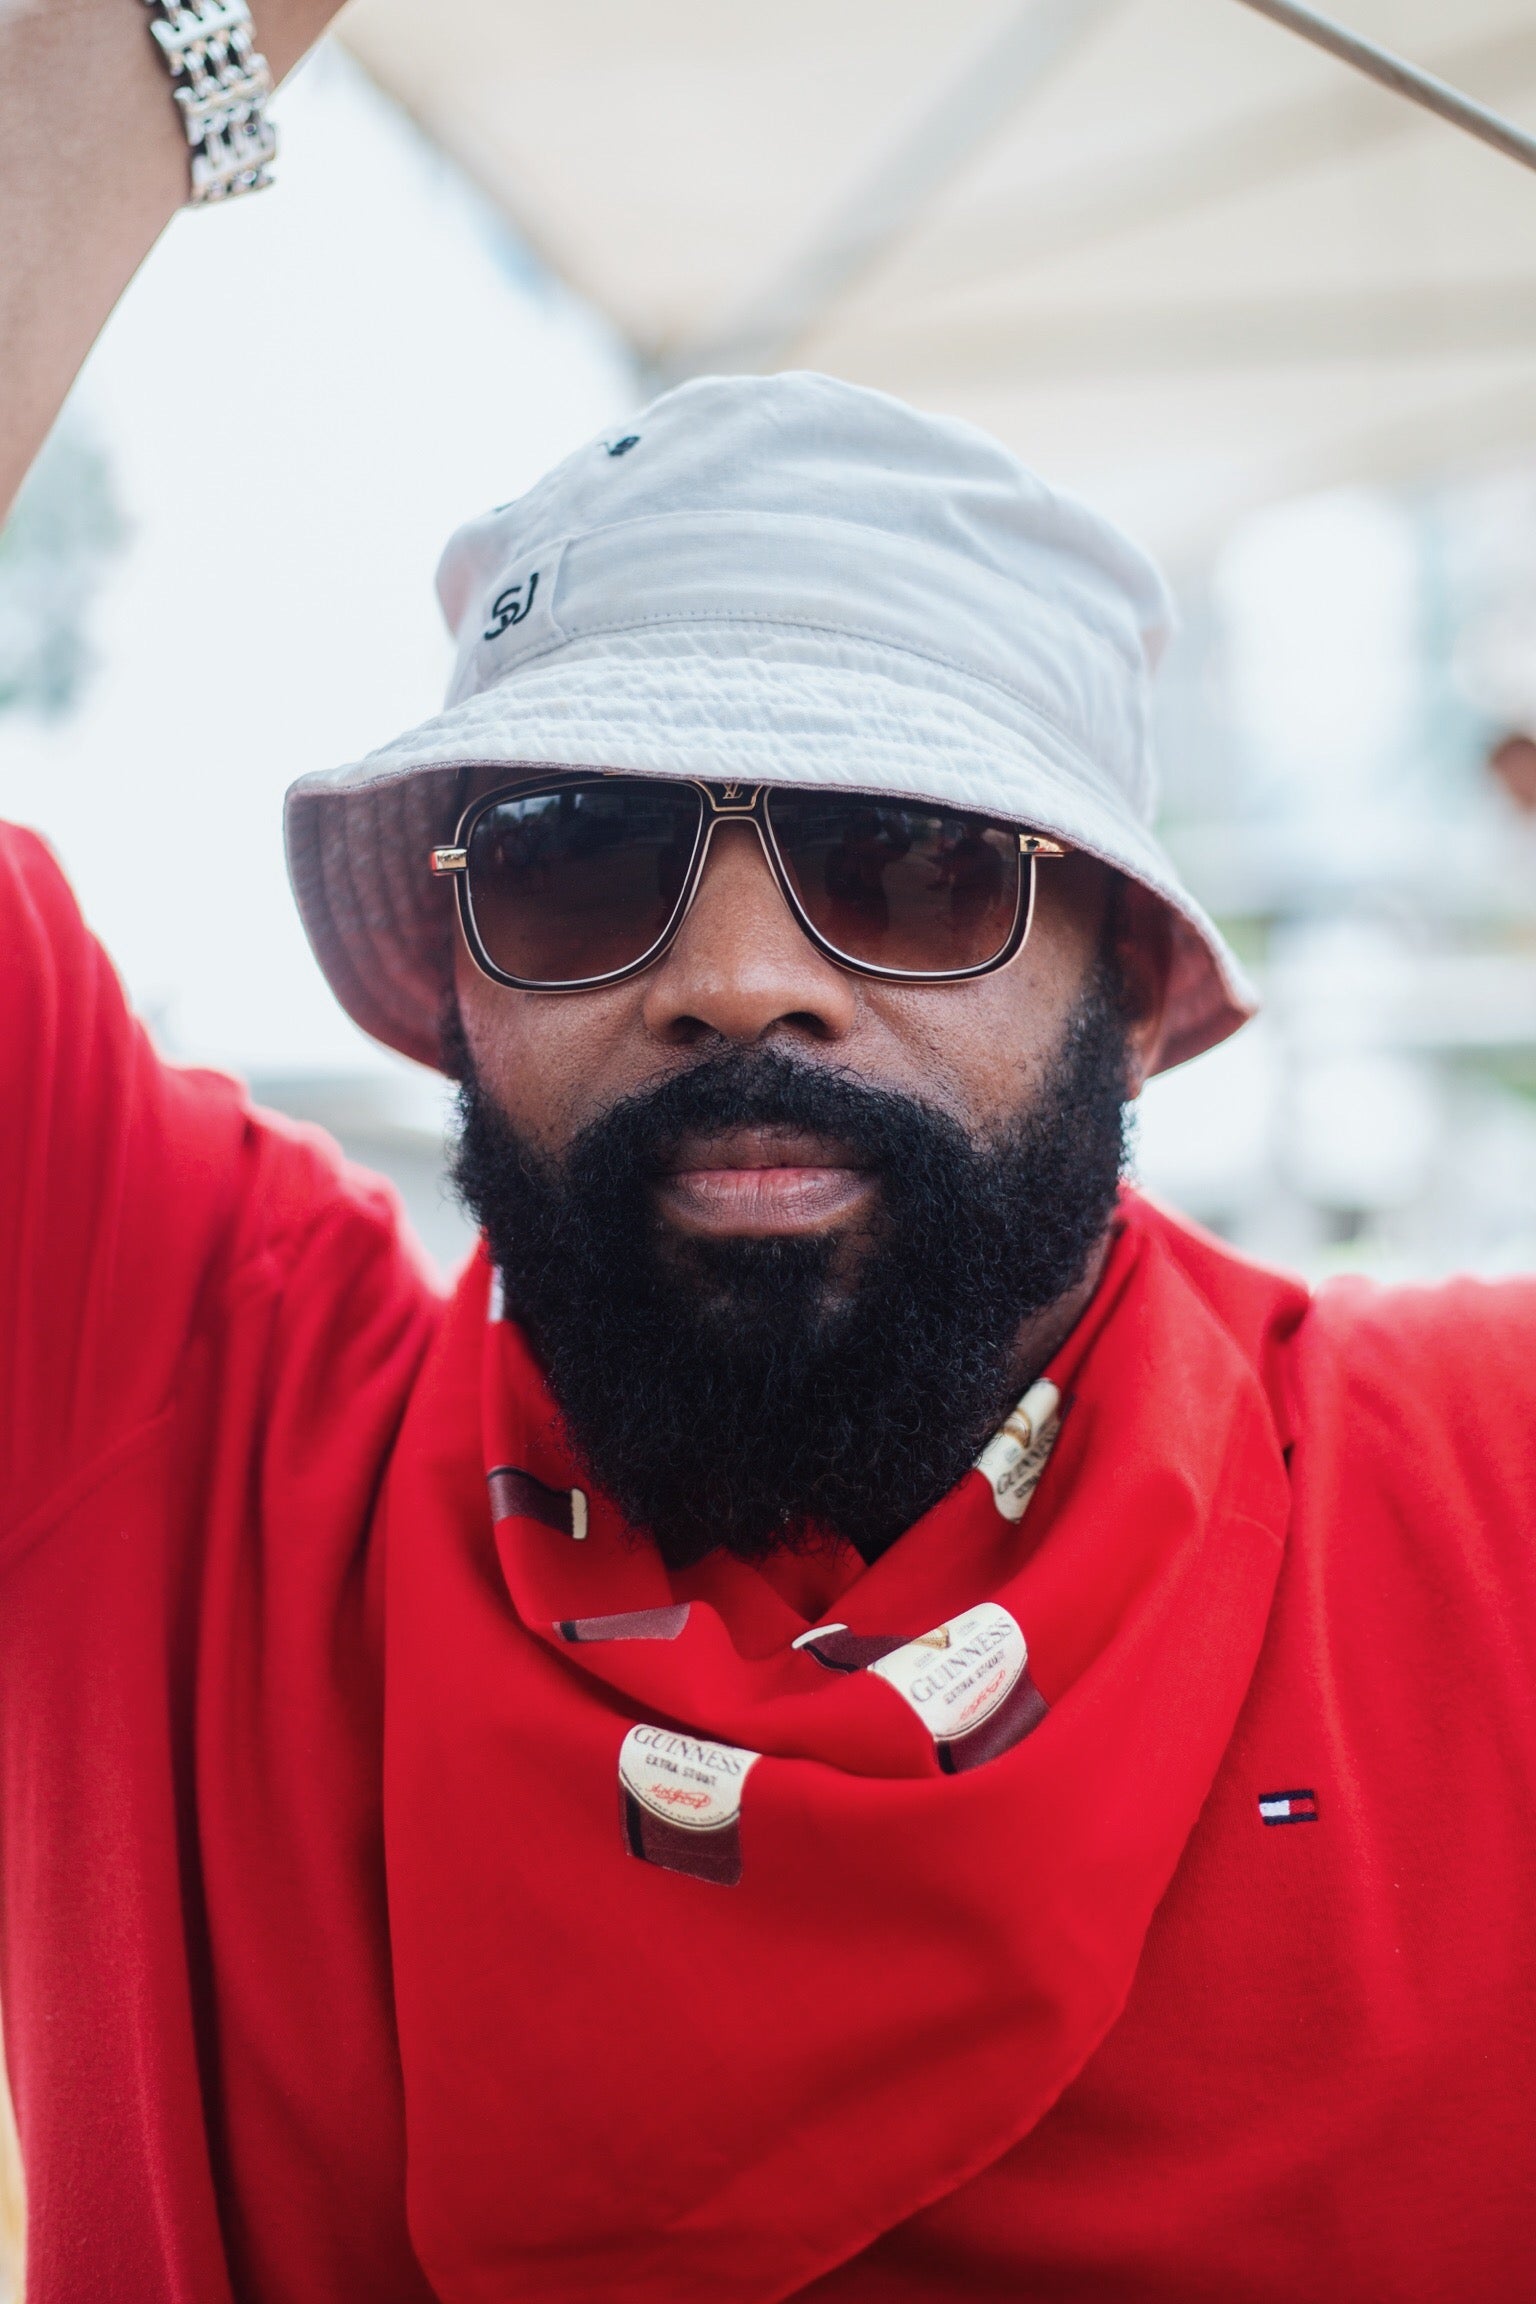 MCM Alert! The Bearded Baes At The 2018 Roots Picnic Were Everywhere
